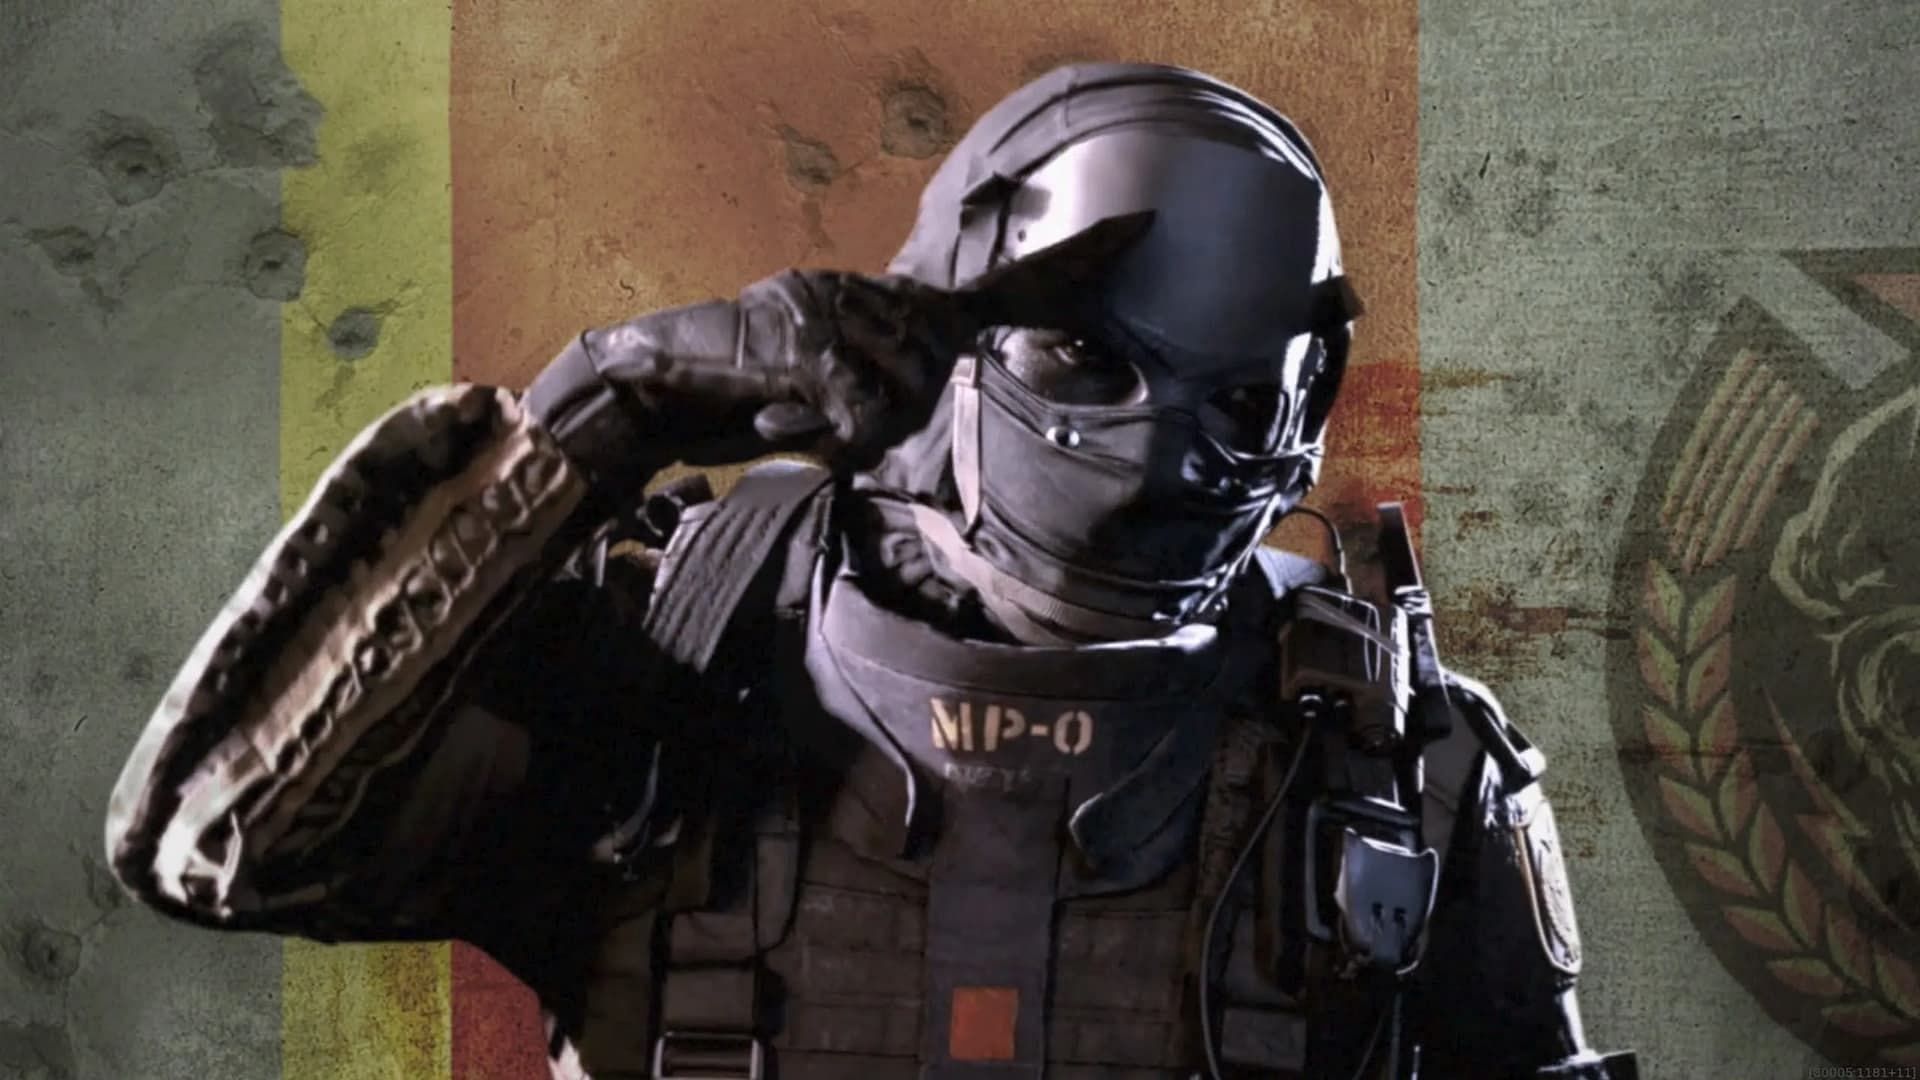 Nikto will soon be joining the roster of operators in Call of Duty Modern Warfare 2 and Warzone Season 4 (Image via Activision)